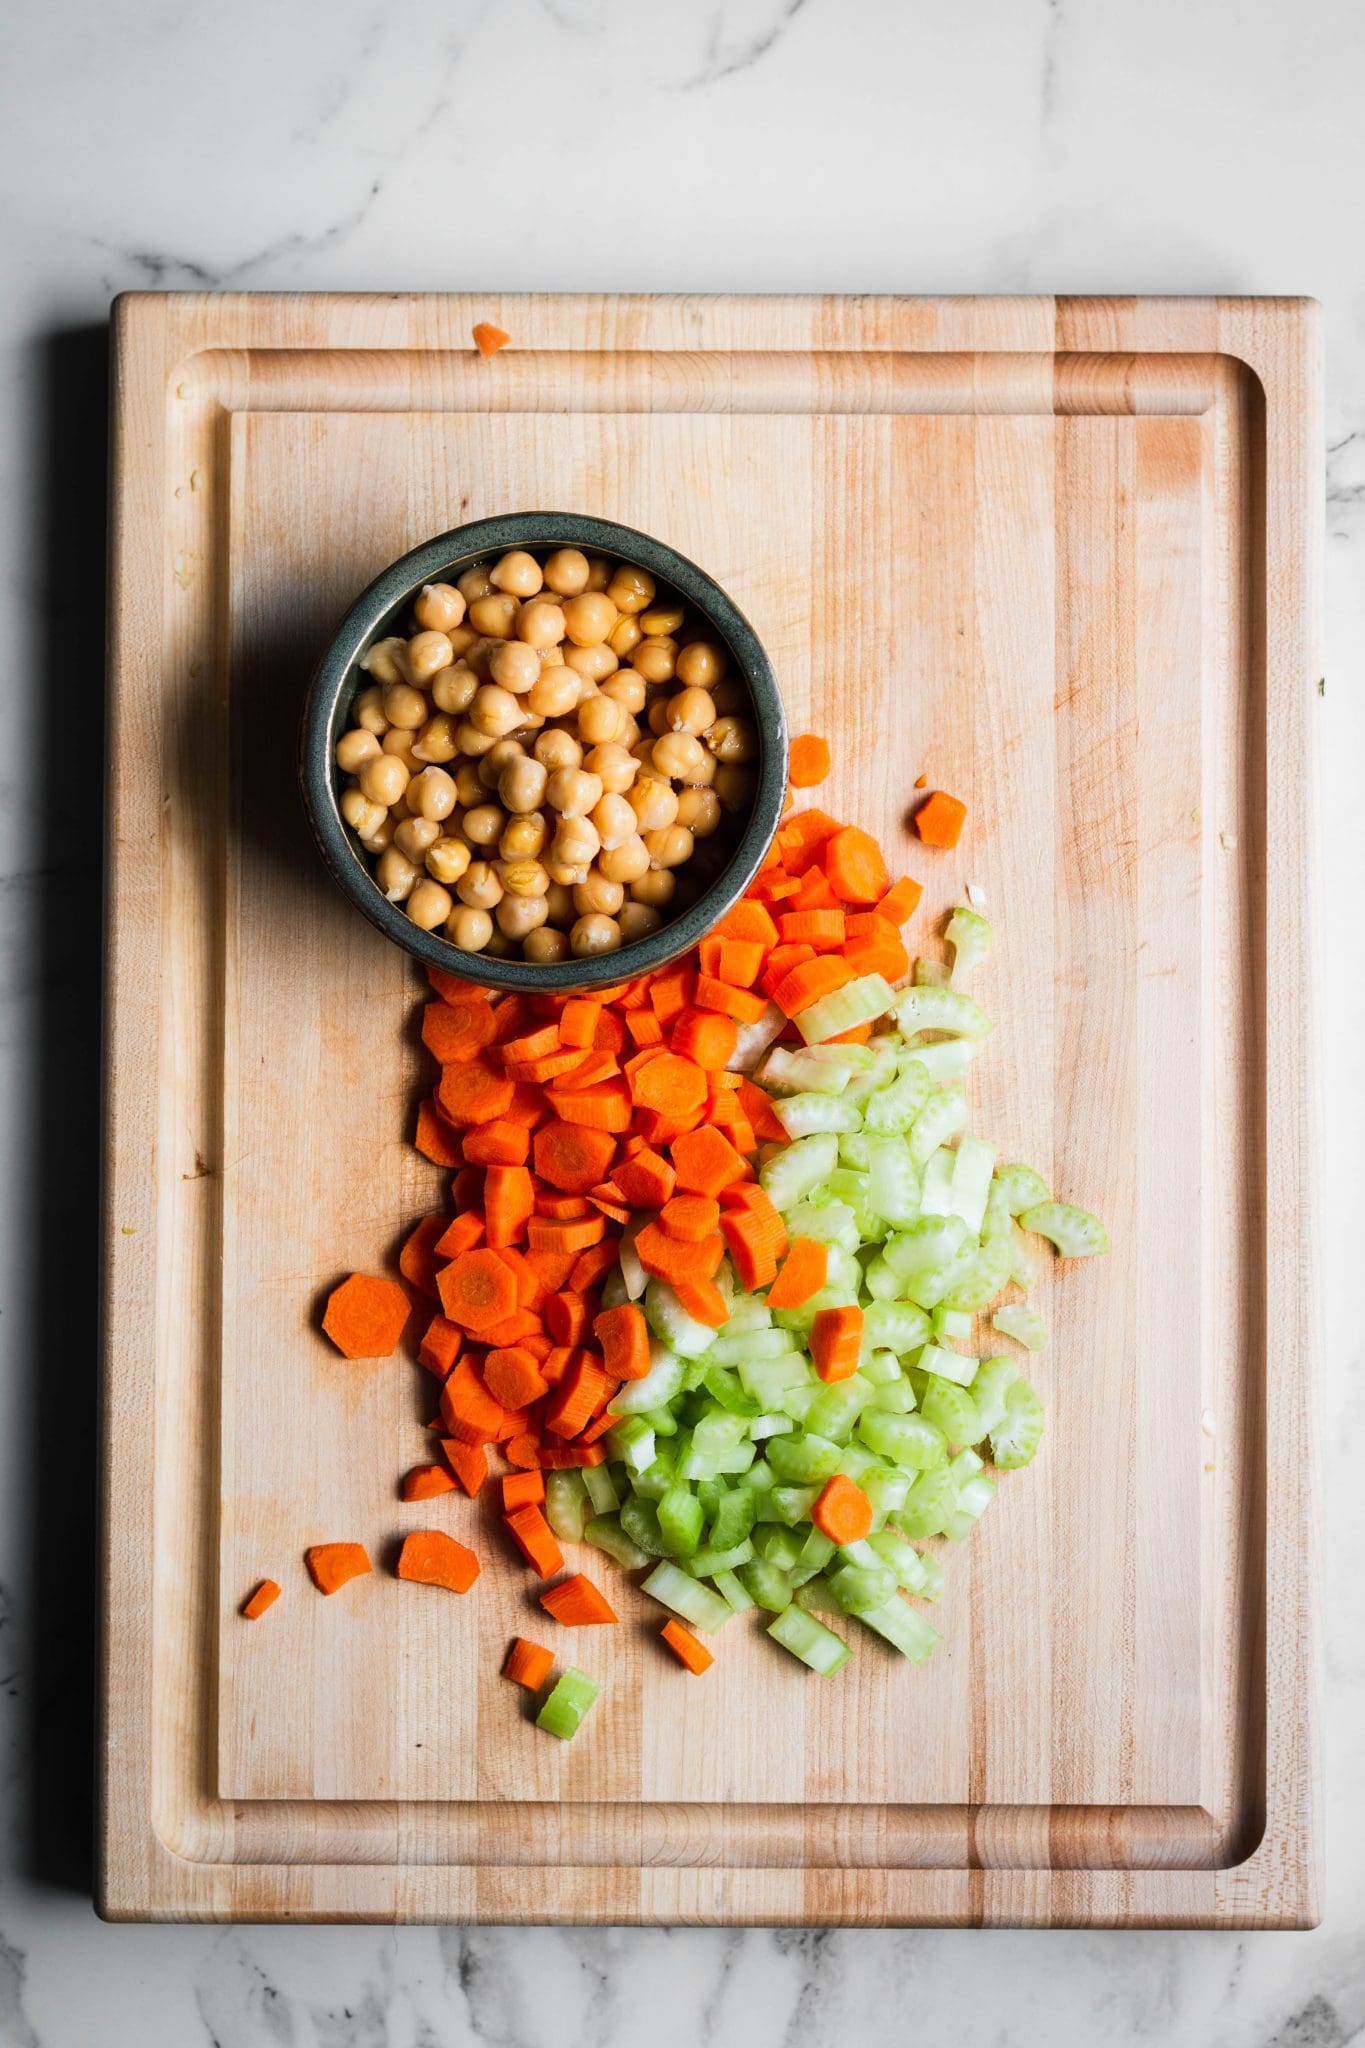 celery, carrots and chickpeas on a cutting board